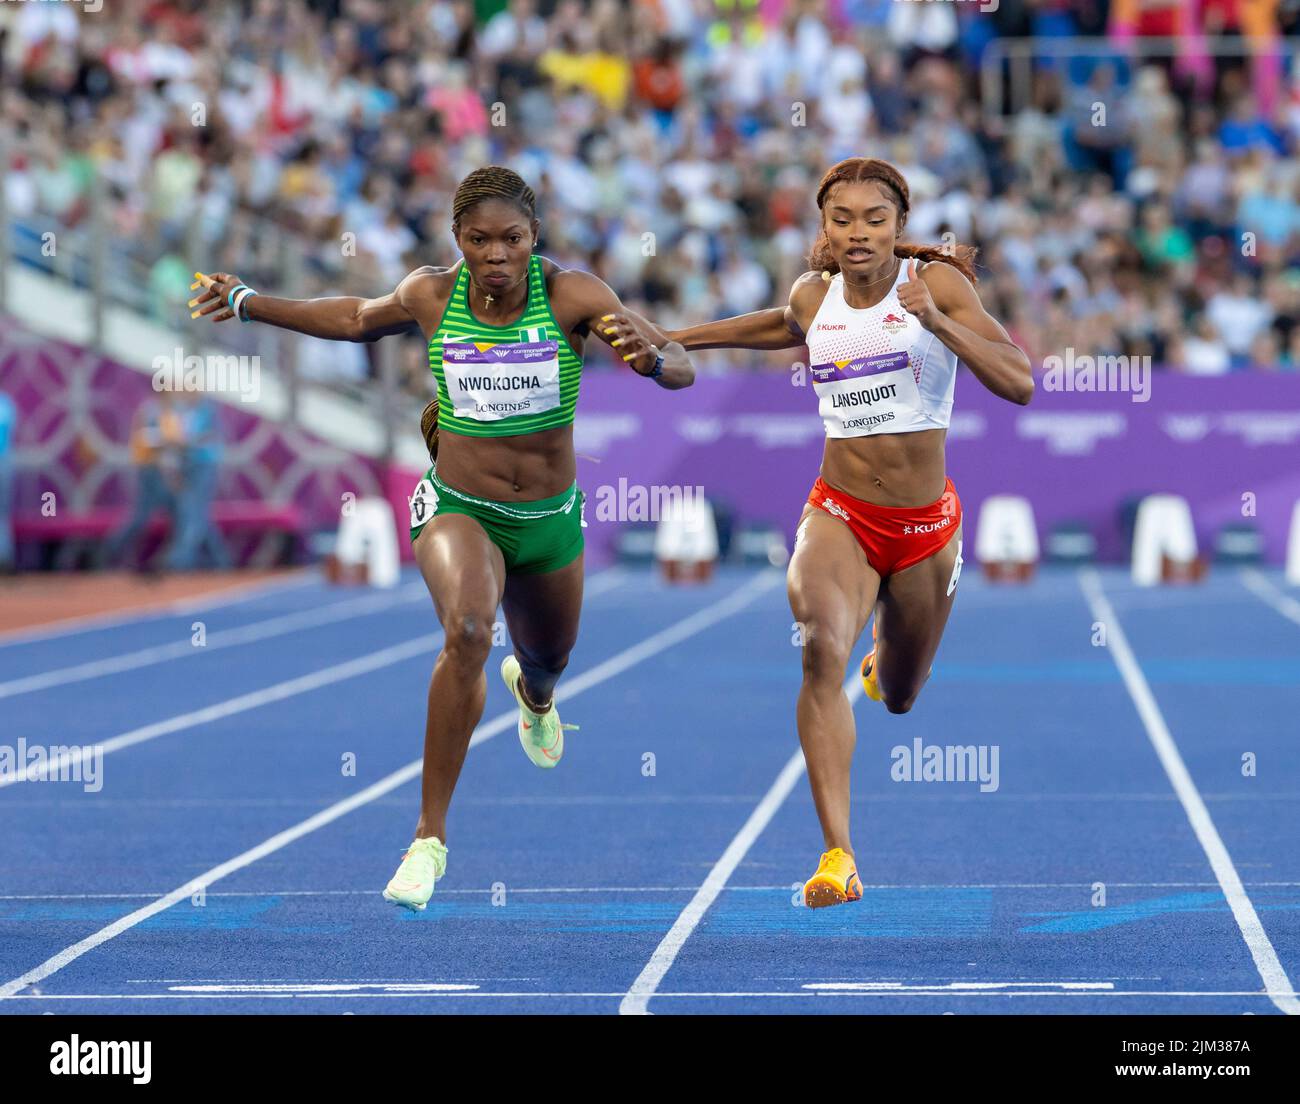 3rd August 2022; Alexander Stadium, Birmingham, Midlands, England: Day 6 of the 2022 Commonwealth Games: Nzubechi Grace Nwokocha (NGR) dips for the finish line to come second place in the Women's 100m Semi-Final 1 alongside Imani Lansiquot (ENG) who came in third place Stock Photo